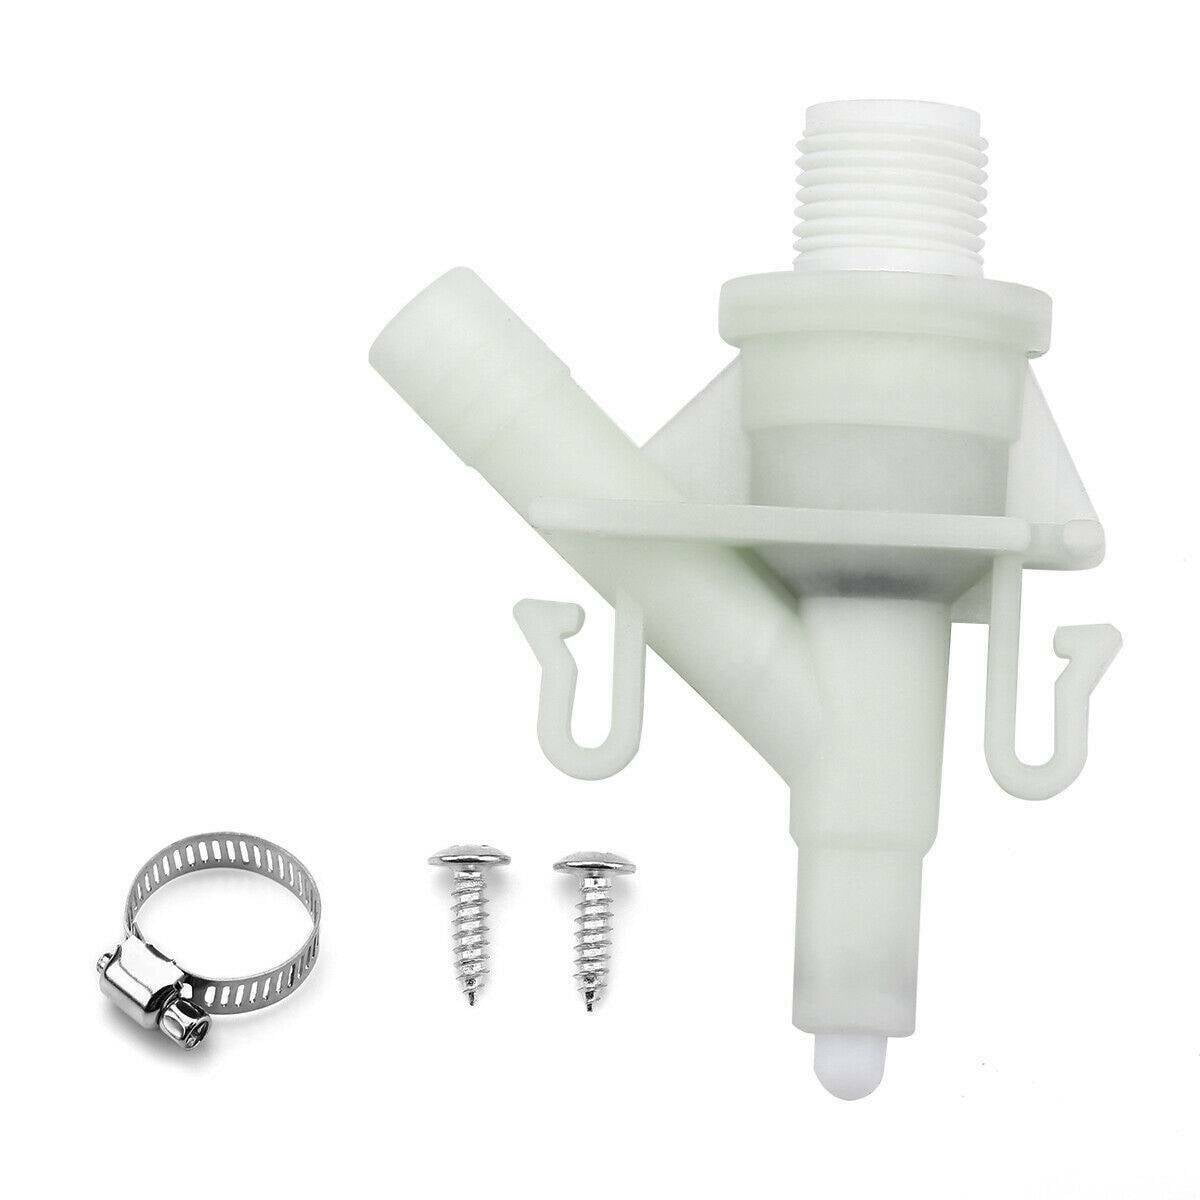 and 320 Upgraded for High Performance in Freezing Conditions Beech Lane Upgraded Water Valve Kit for Dometic Toilets 300 Improved Valve Lifespan 310 Compare to Dometic Toilet Valve 385311641 